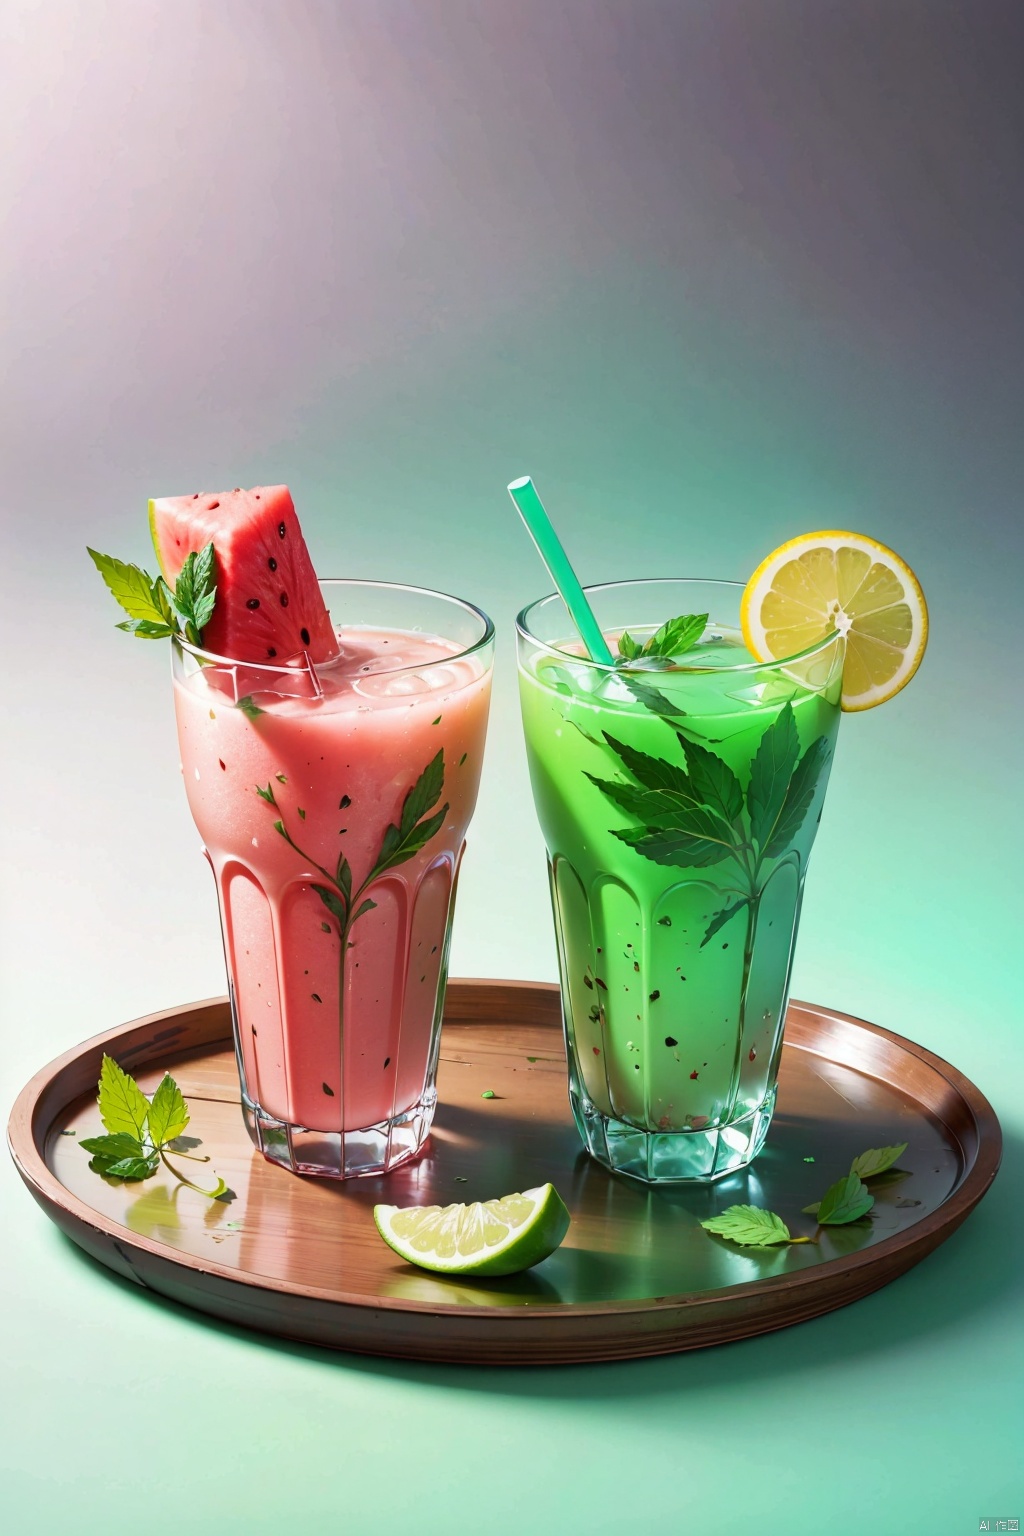 A glass of watermelon juice,pink,frozen effect,on a wooden tray,next to two lemons and mint leaves,green and red straws,super realistic food image,full theme shown in photo,Randy Post,hyper realistic & quot,hyper realistic & quot,high res photo